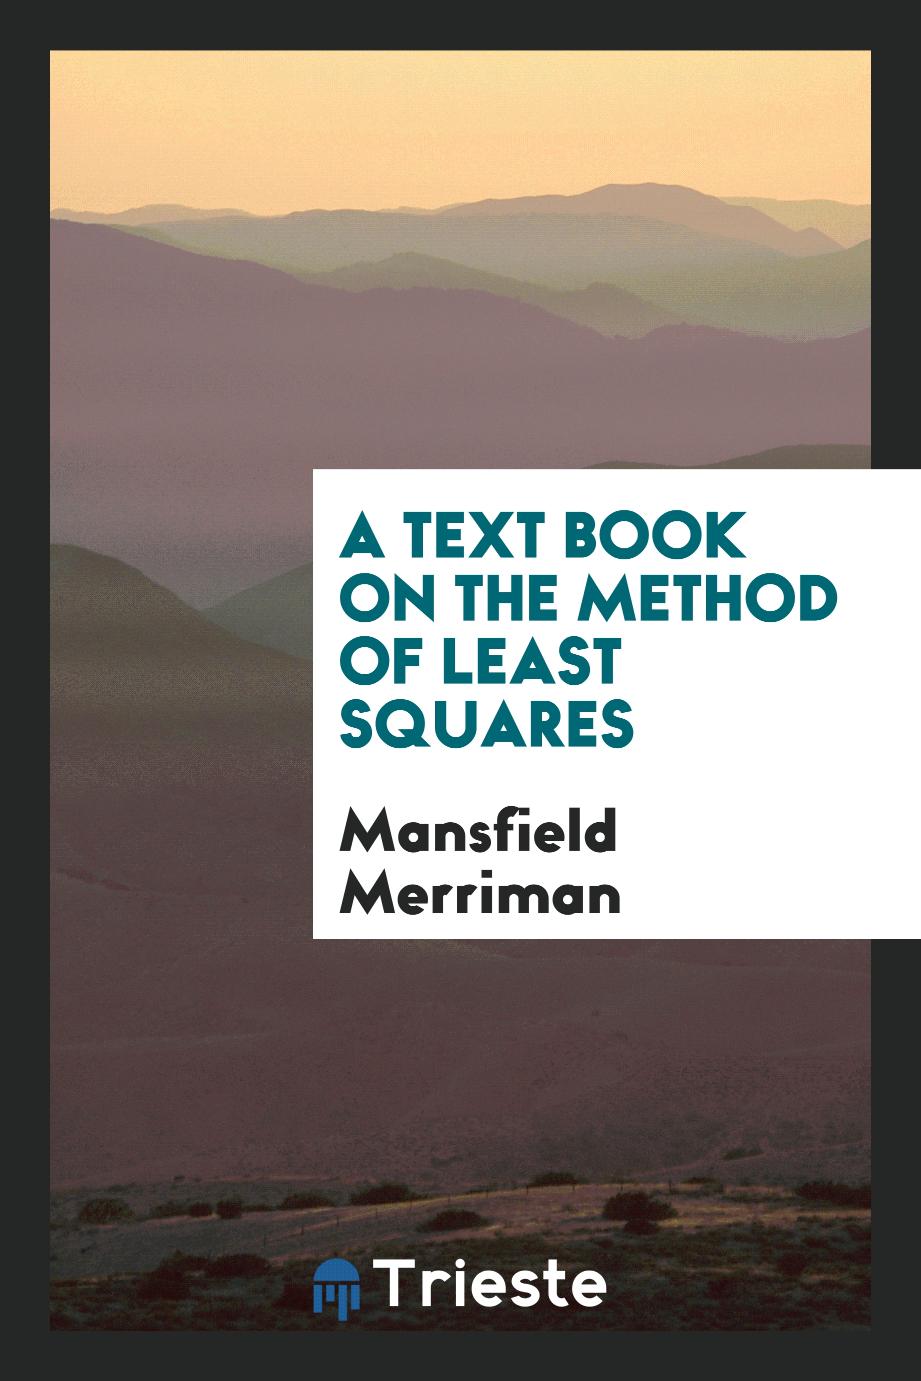 A text book on the method of least squares